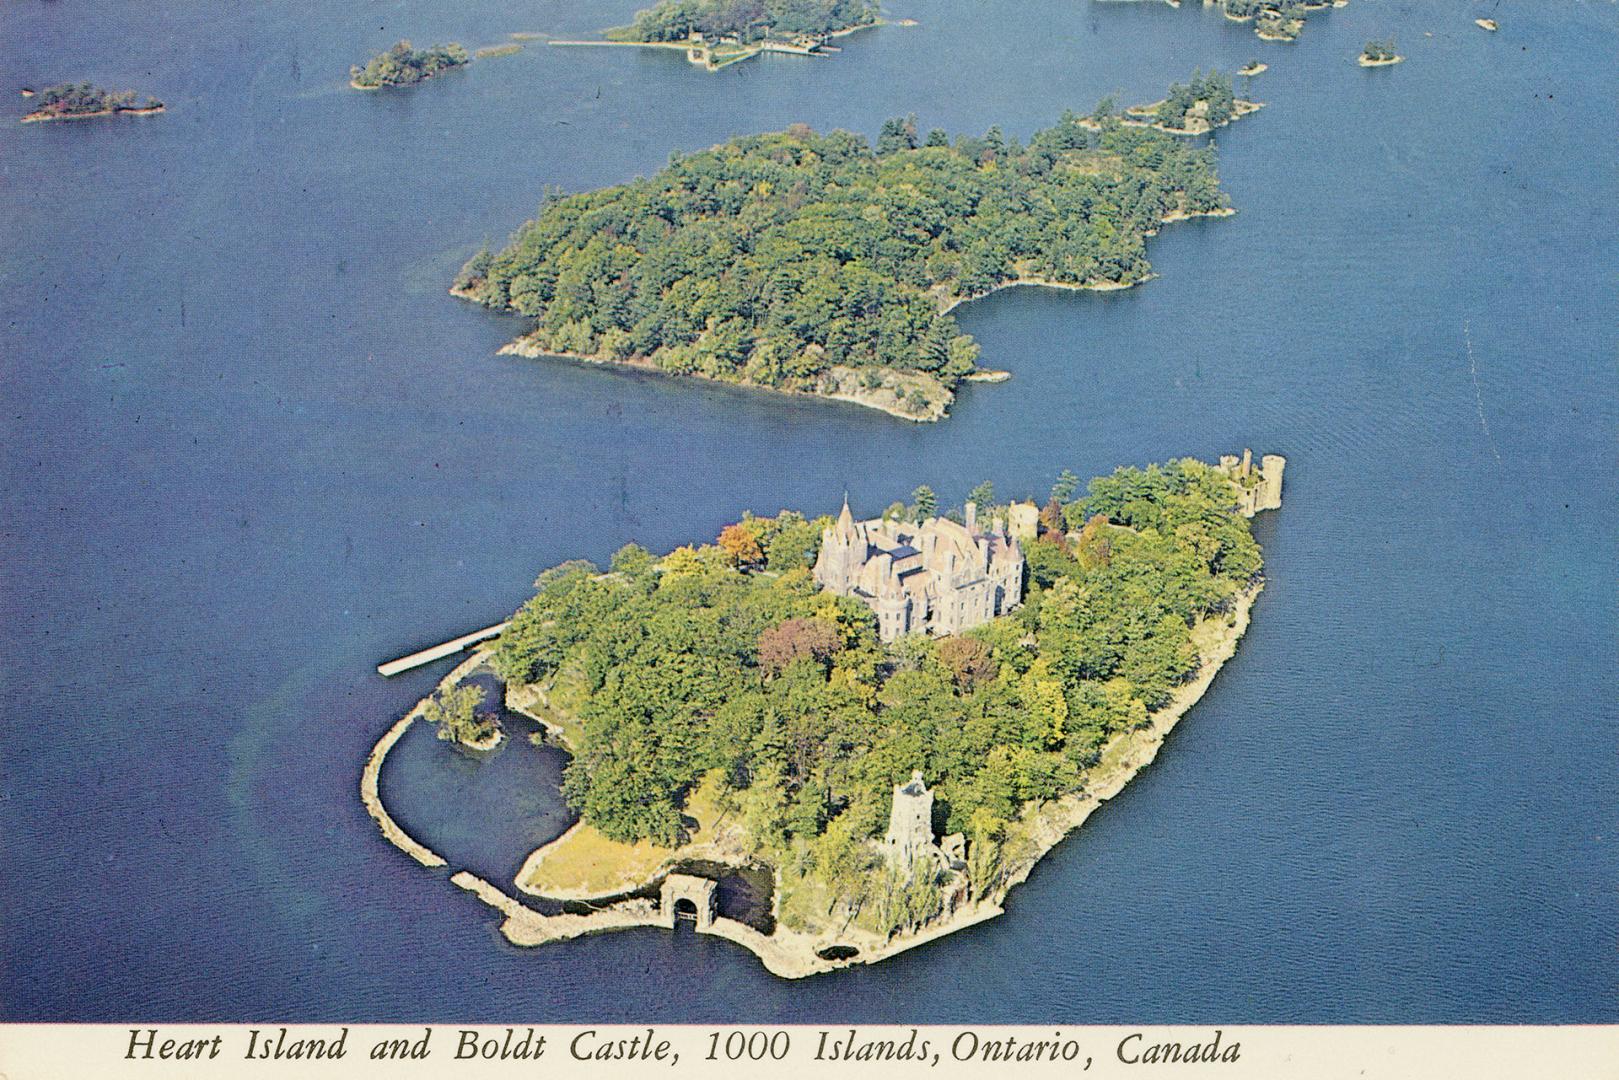 Color, aerial photograph of a view of a waterway, with a large castle on an island.